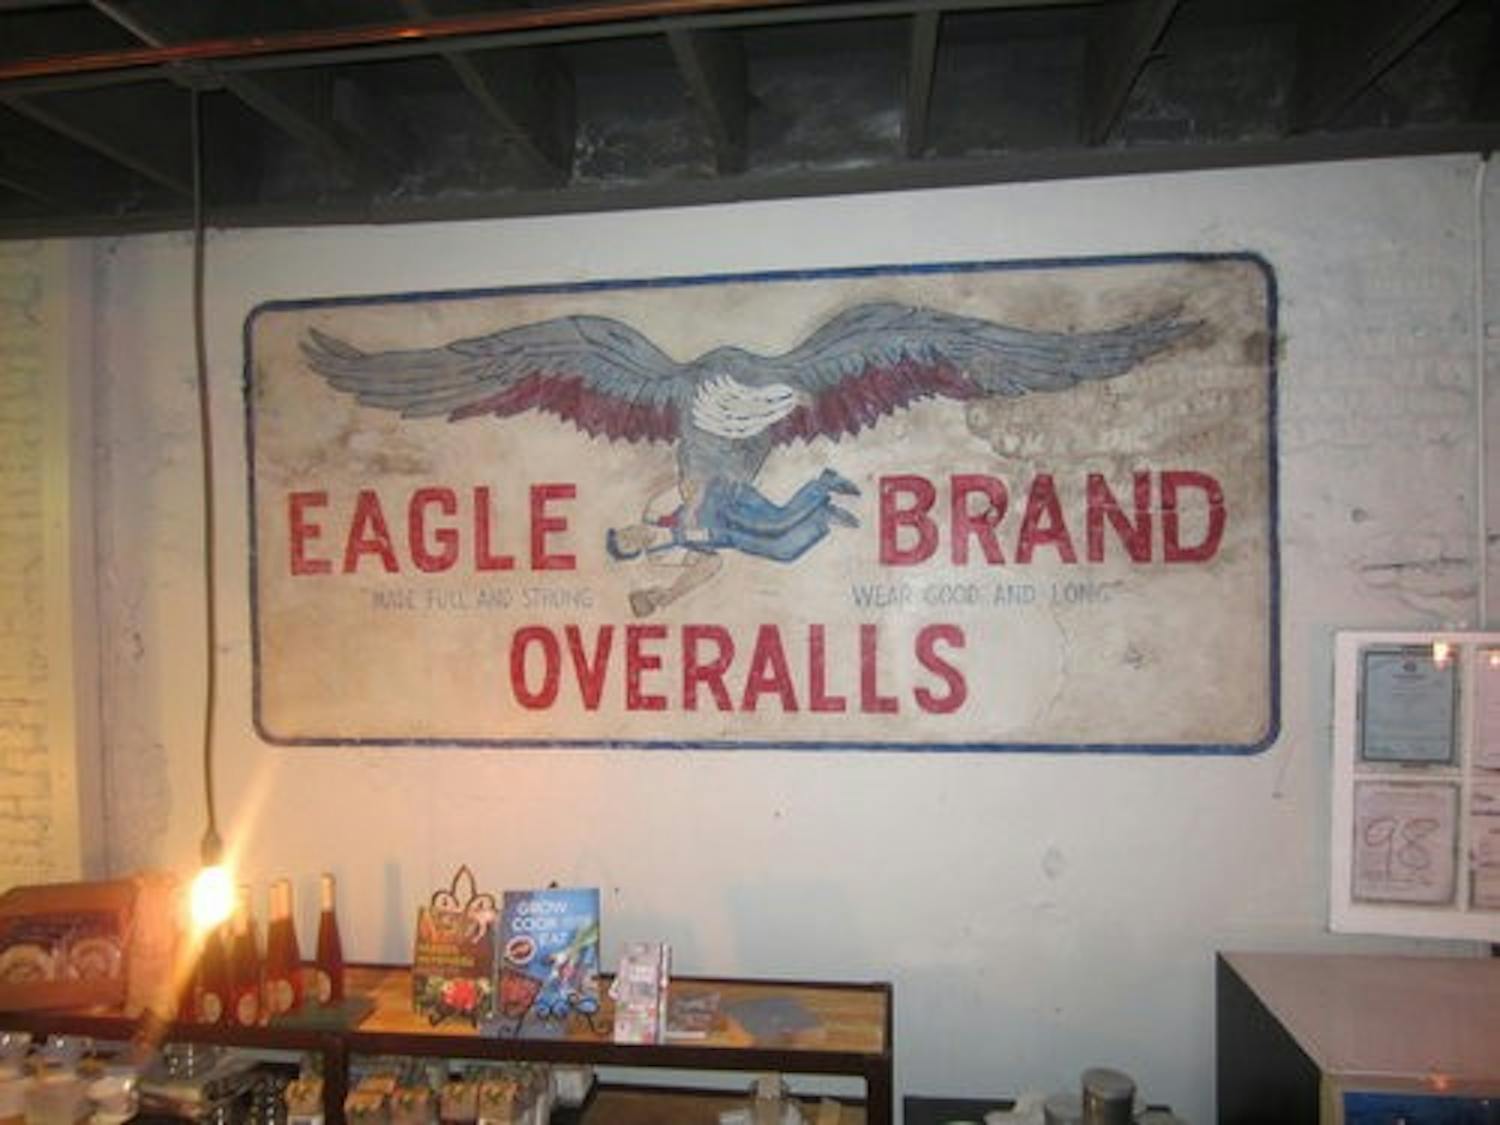 In the mid-1800s, Eagle Brand Overalls were manufactured in the very spot that now brews coffee. During the Civil War, the factory stopped making overalls in order to make uniforms for the Southern military. (Susan Ann / WRITER)